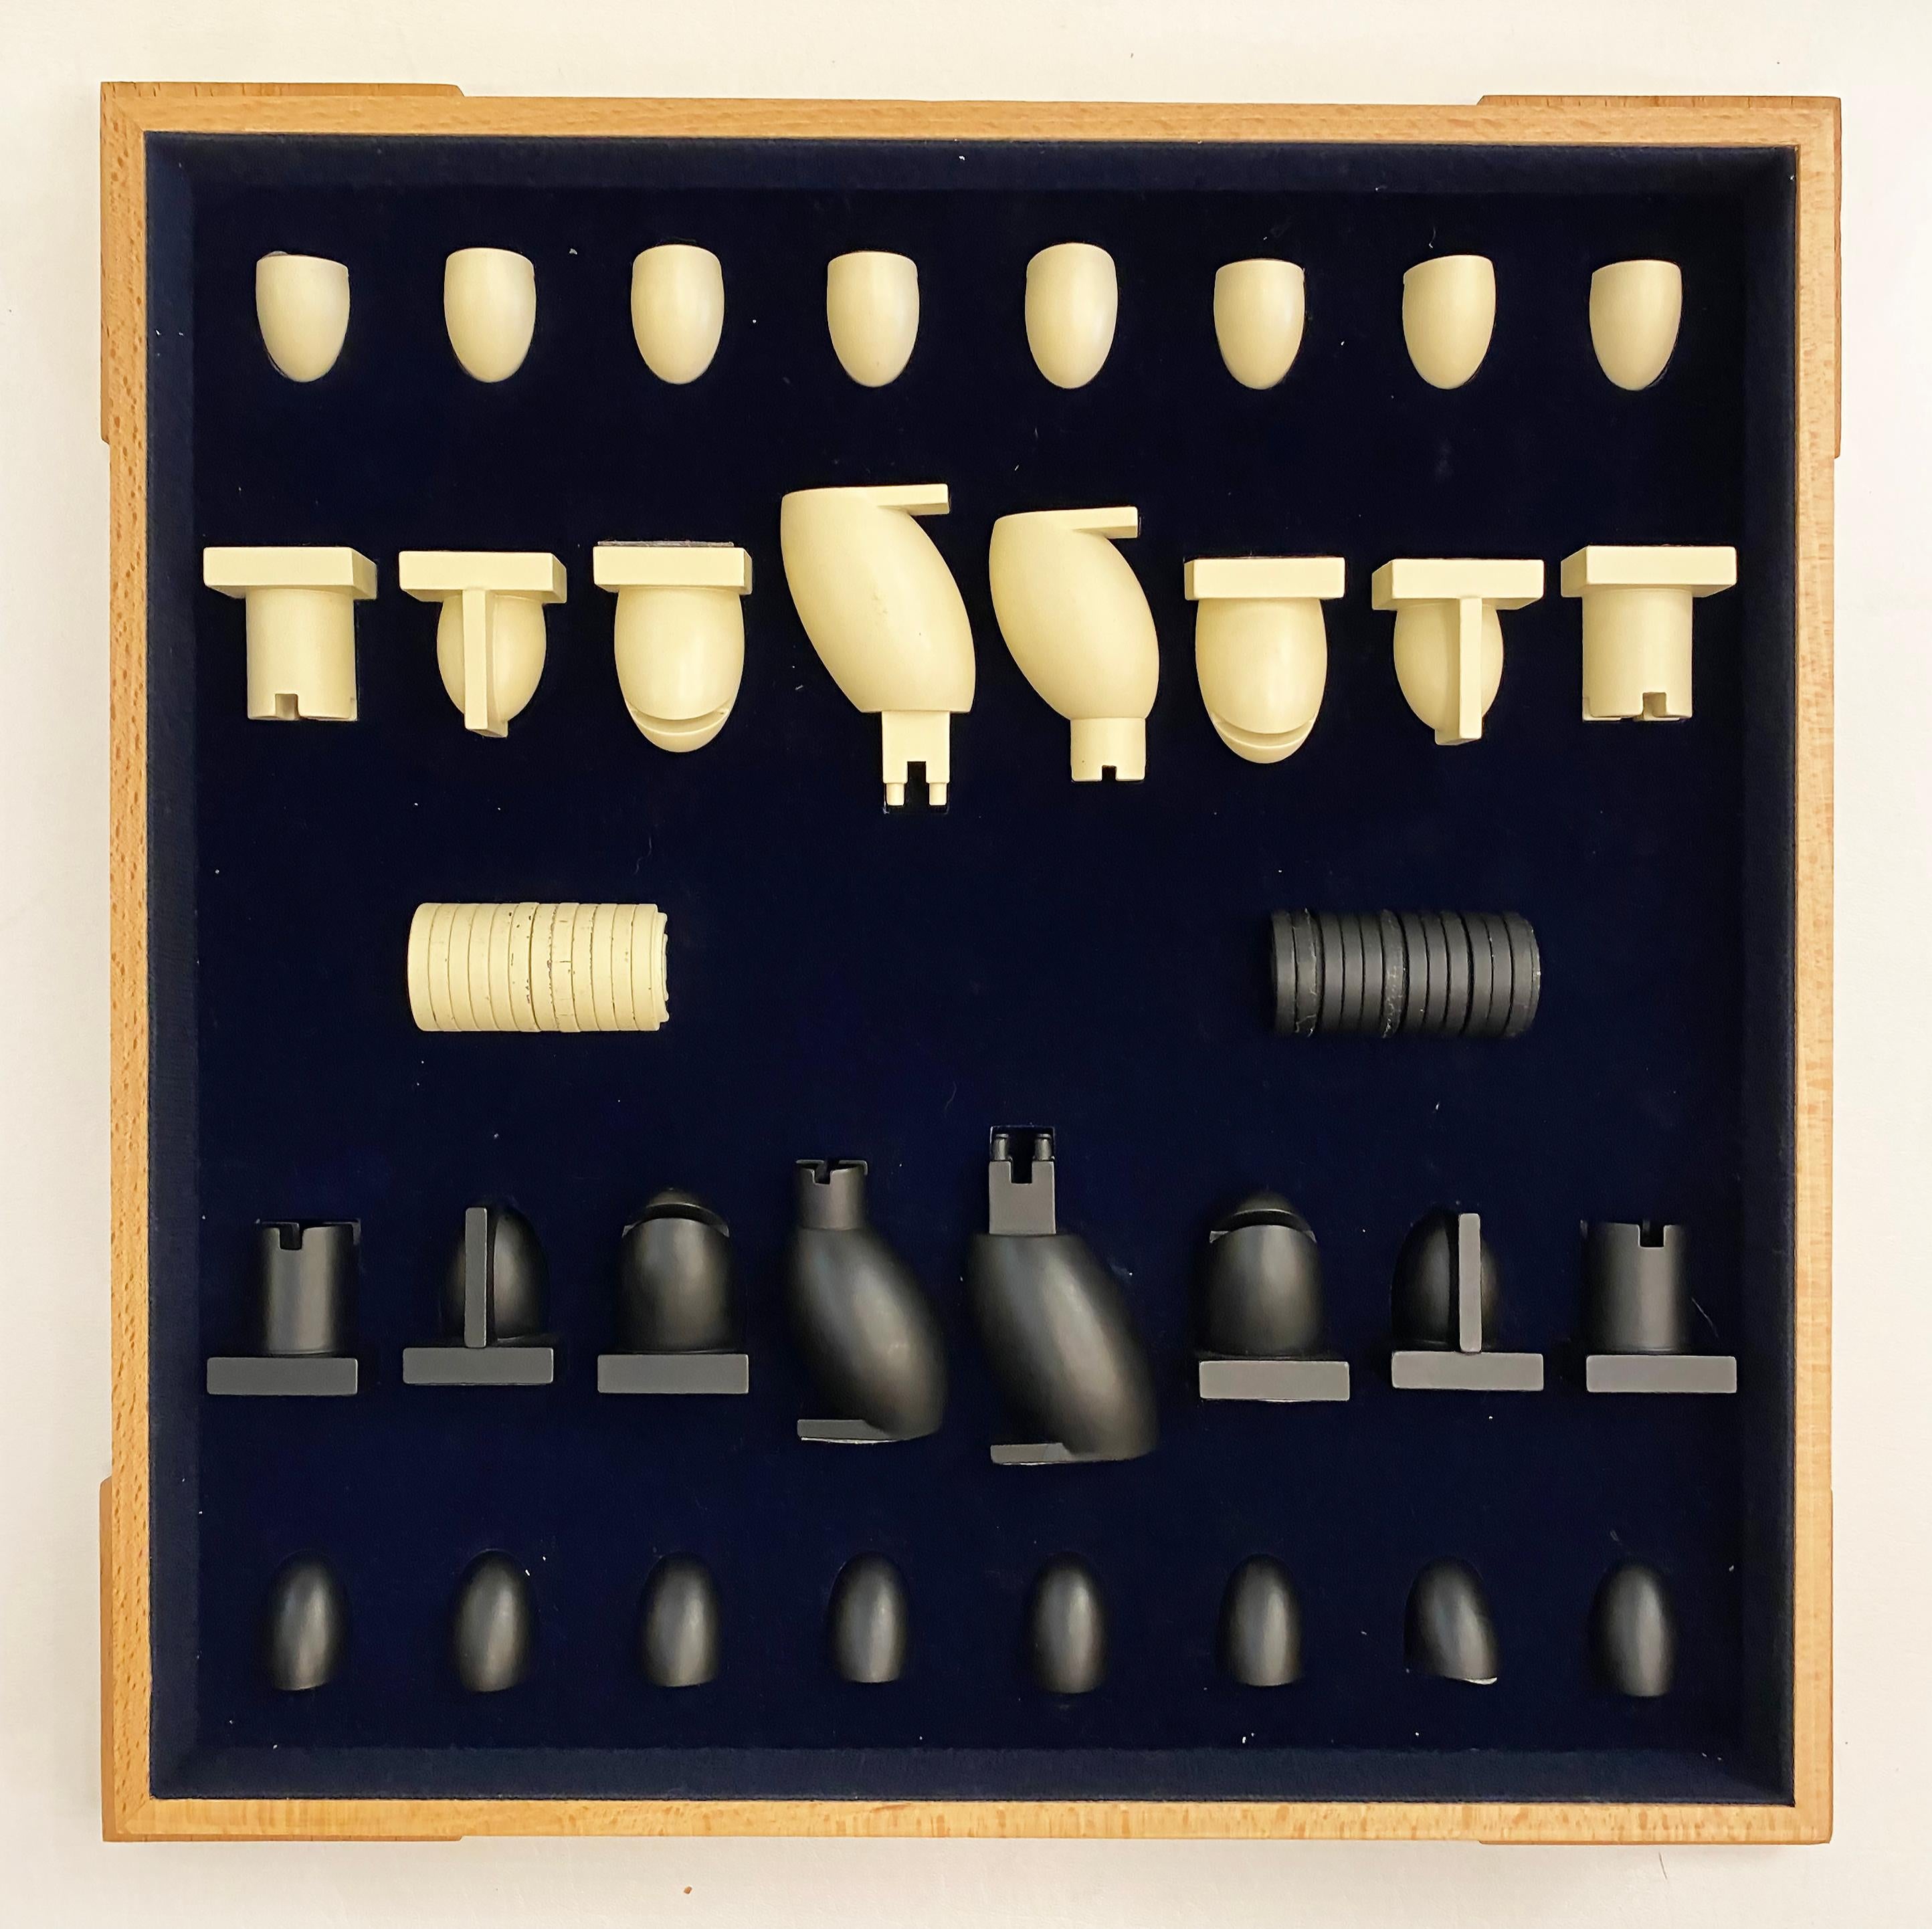 Michael Graves Post-modern Chess and Checkers Board Game and Pieces

Offered for sale is an original post-modern Michael Graves(1934-) chess and checkers set. The box and board are made from maple. The pieces are resin in ebony and ivory tones. The